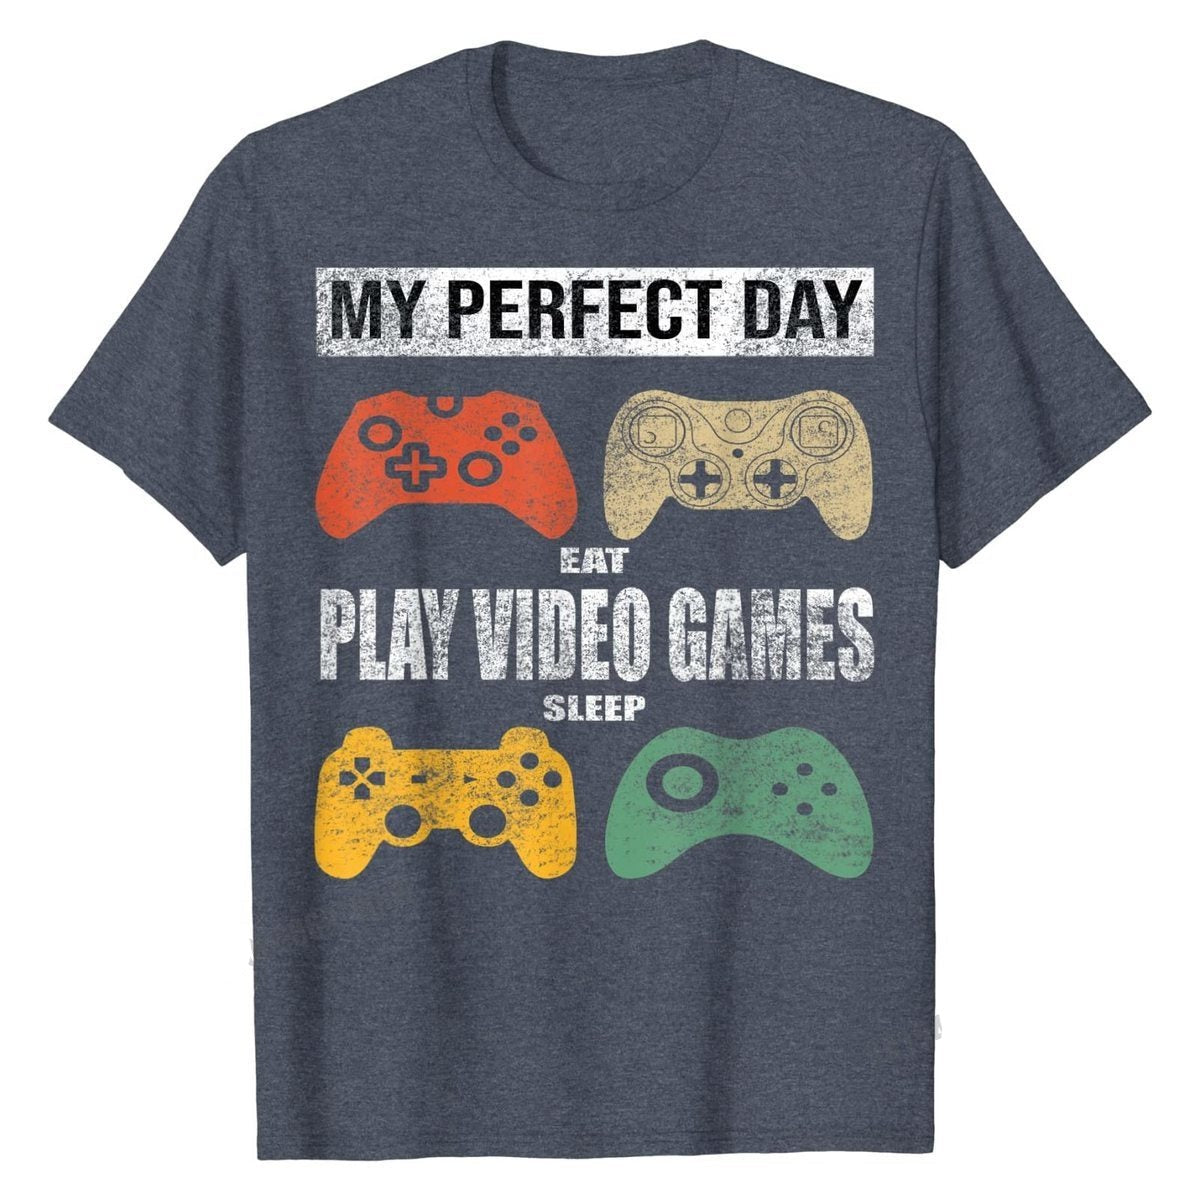 My Perfect Day Video Games T-shirt